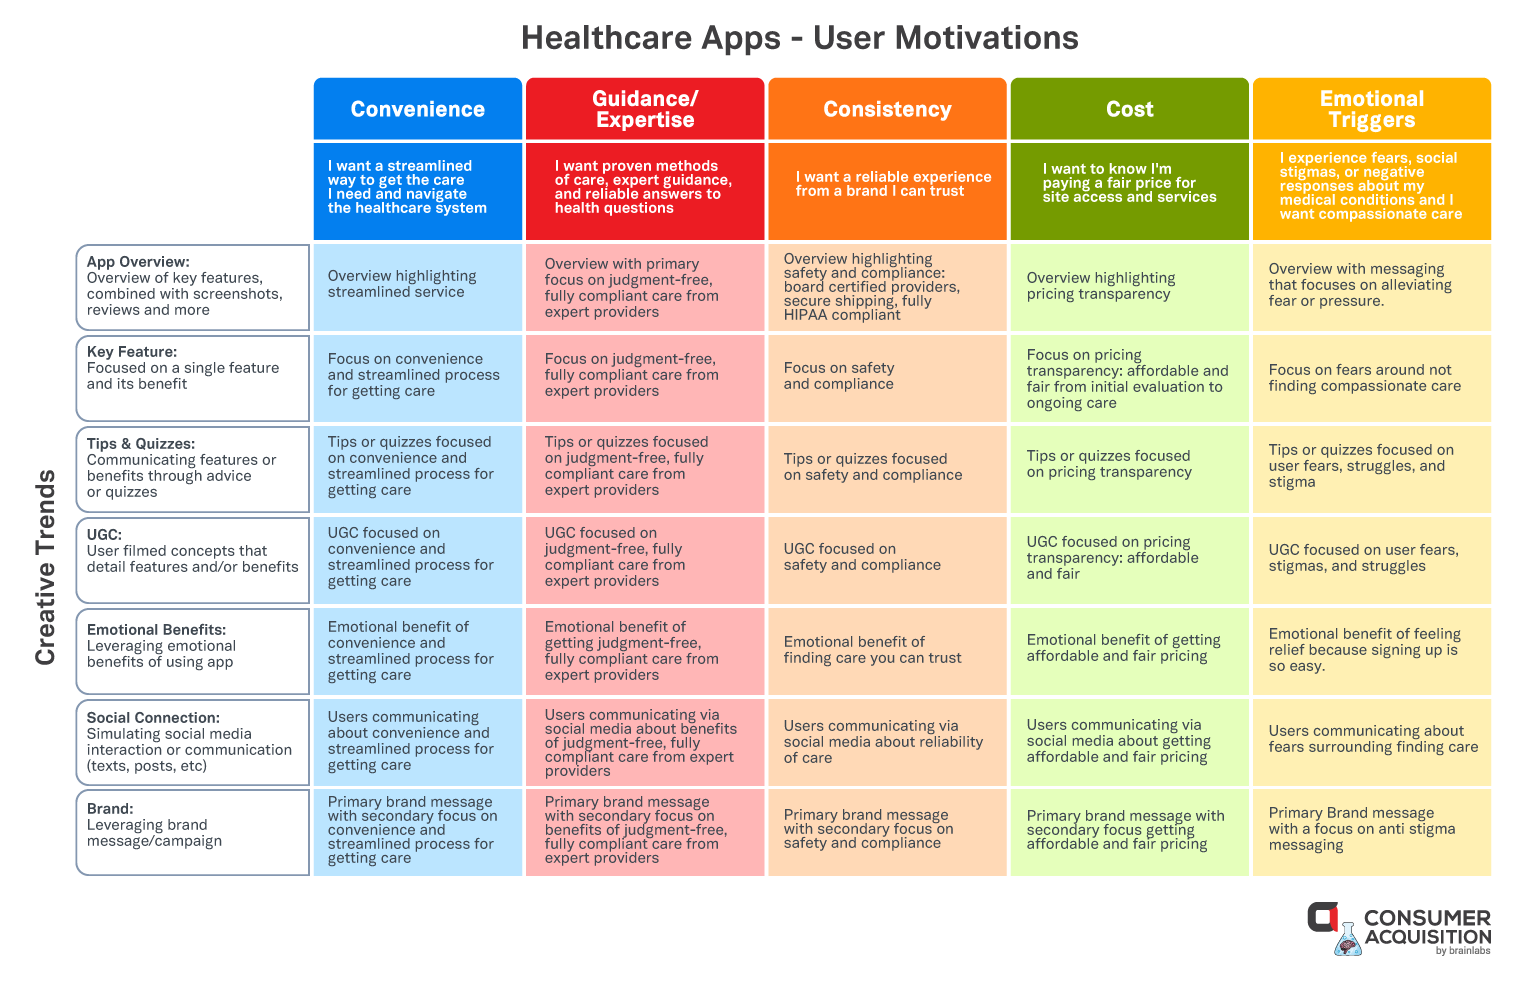 telehealth and healthcare apps user motivations